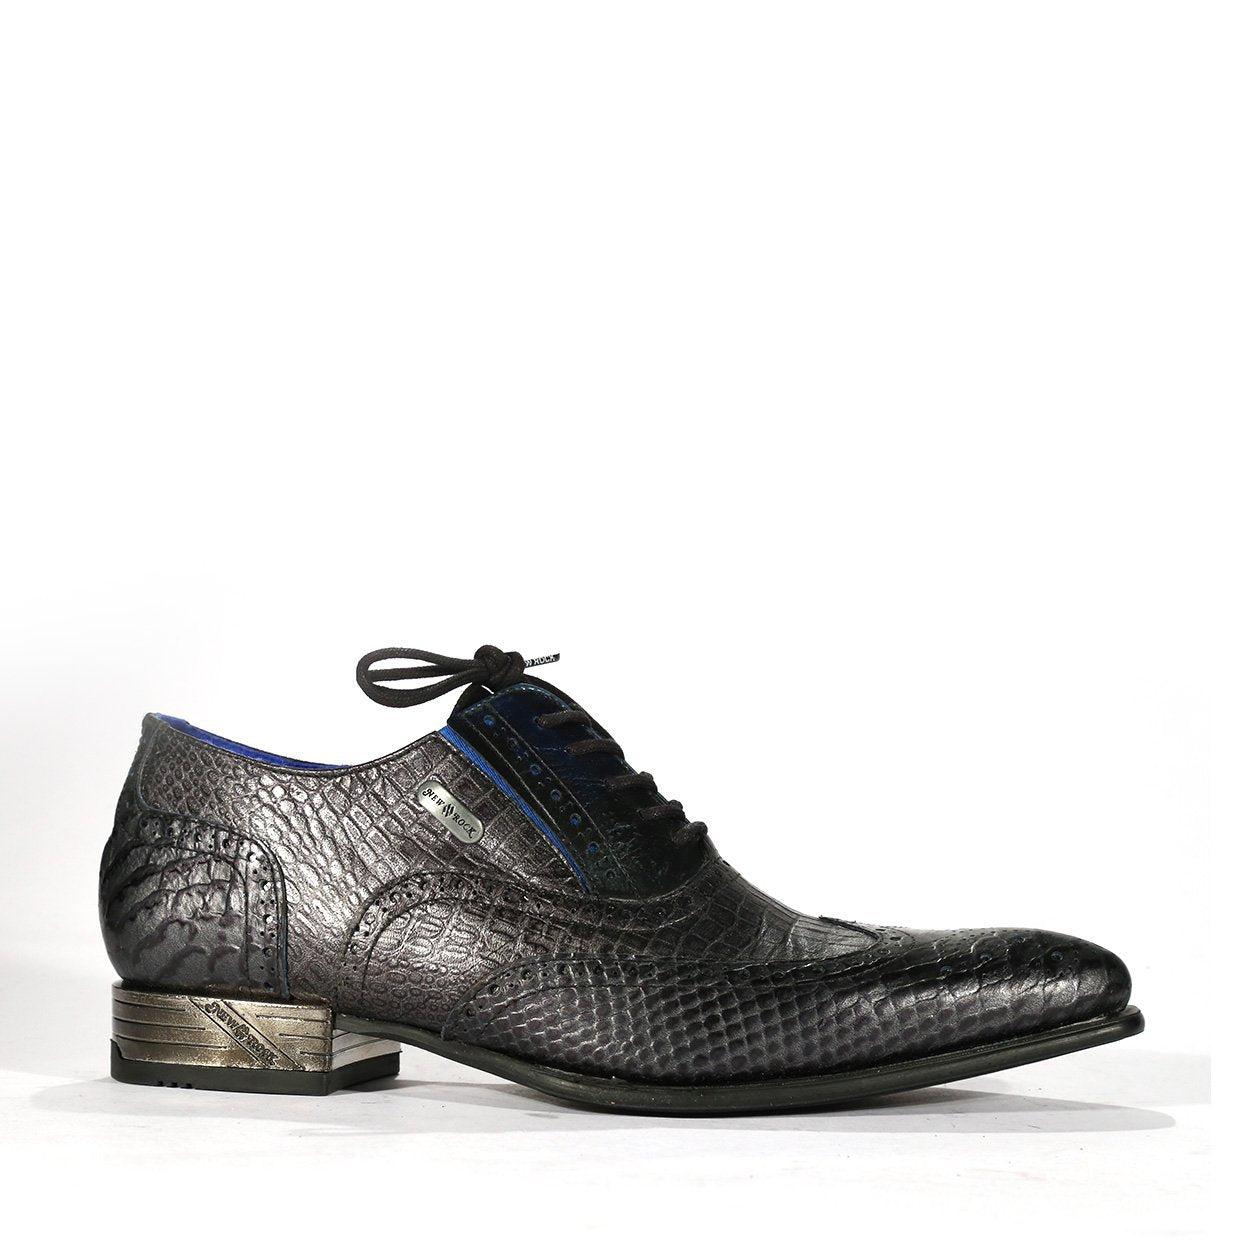 New Rock Designer Shoes Black / Blue Exotic Print / Calf-skin Leather  Classic Oxfords M-nw136-c6 (nrs1265-s) for Men | Lyst